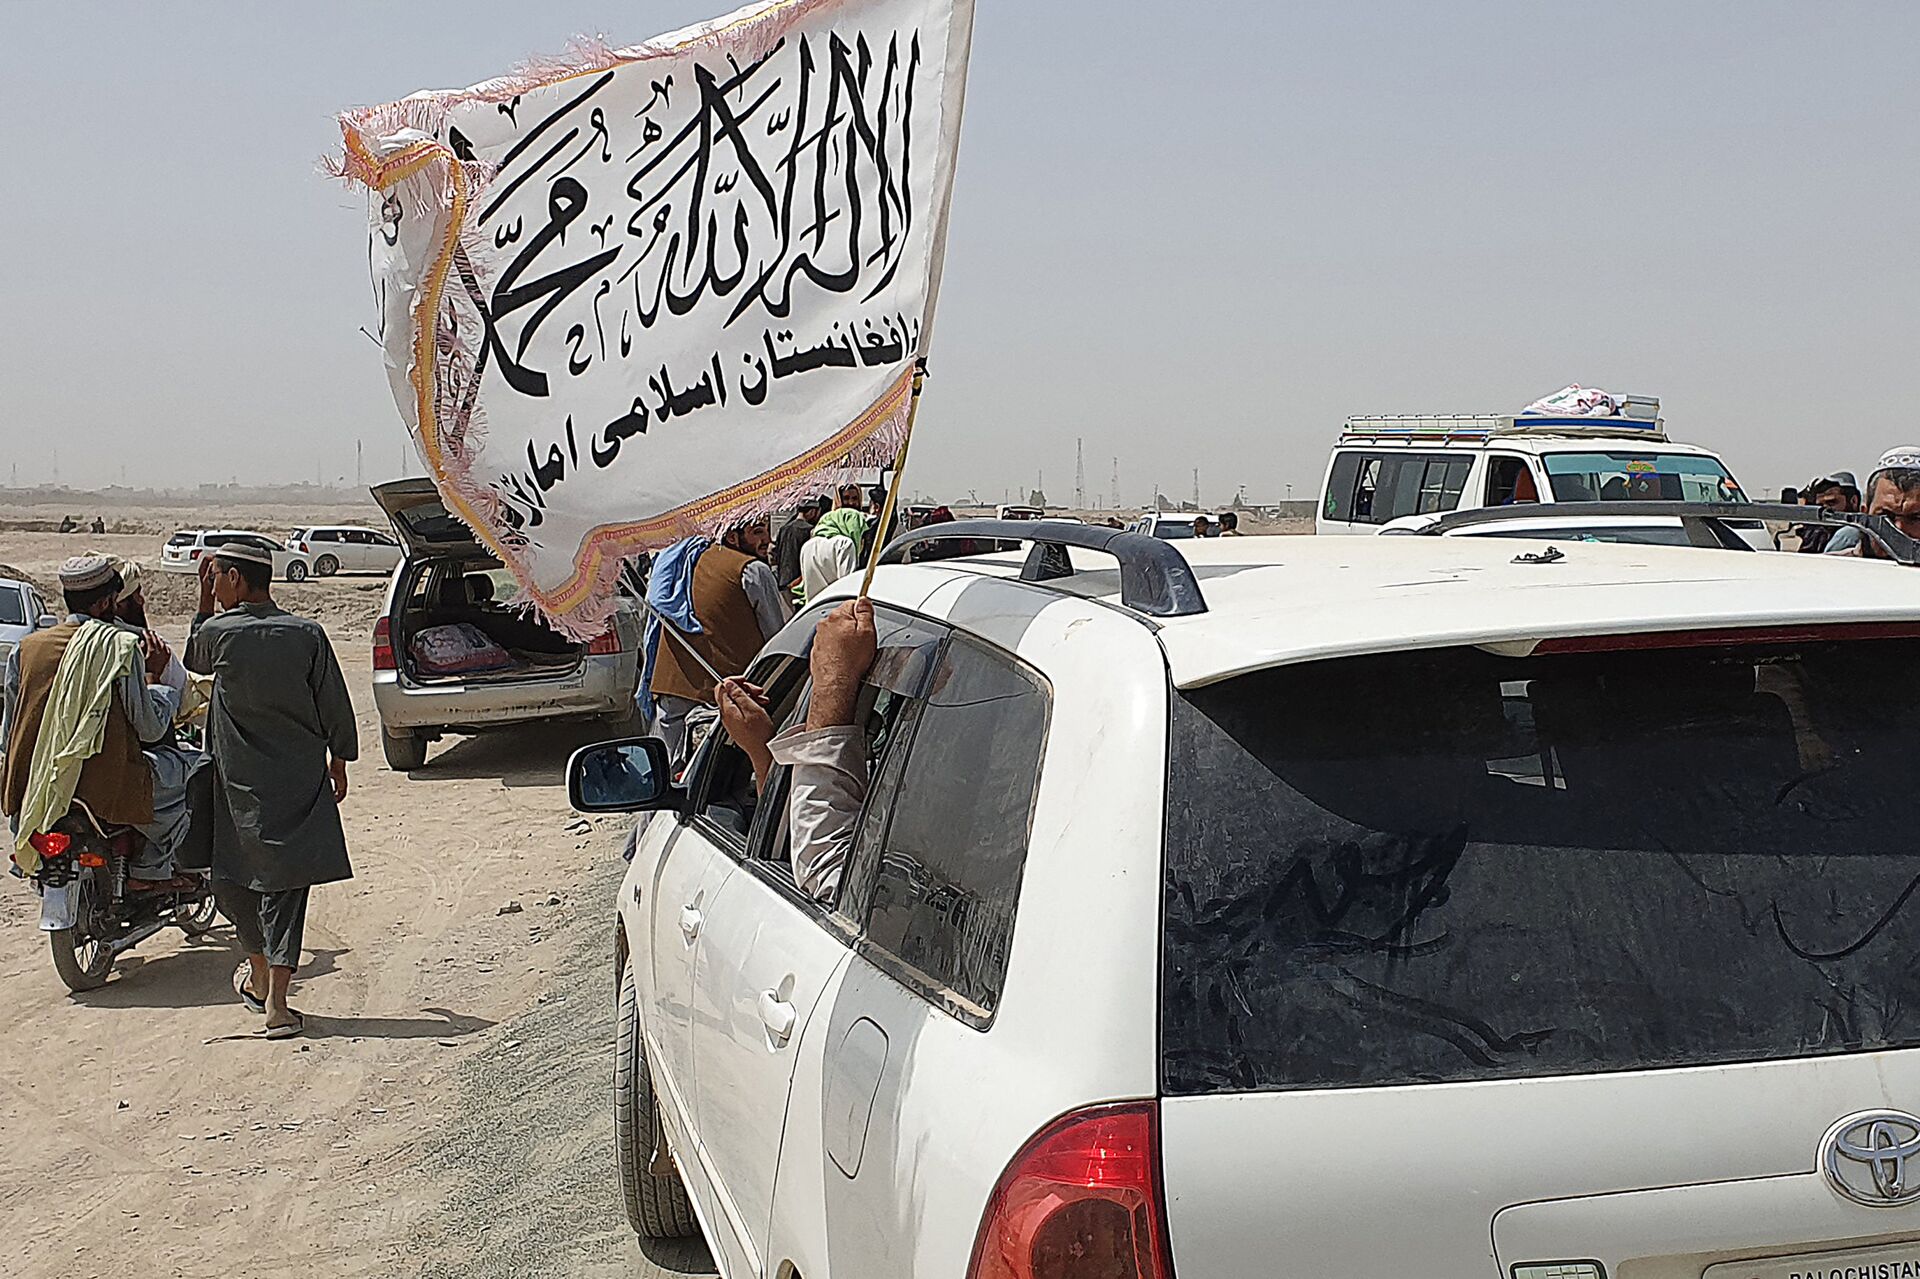 People wave a Taliban flag as they drive through the Pakistani border town of Chaman on July 14, 2021, after the Taliban claimed they had captured the Afghan side of the border crossing of Spin Boldak along the frontier with Pakistan - Sputnik International, 1920, 07.09.2021